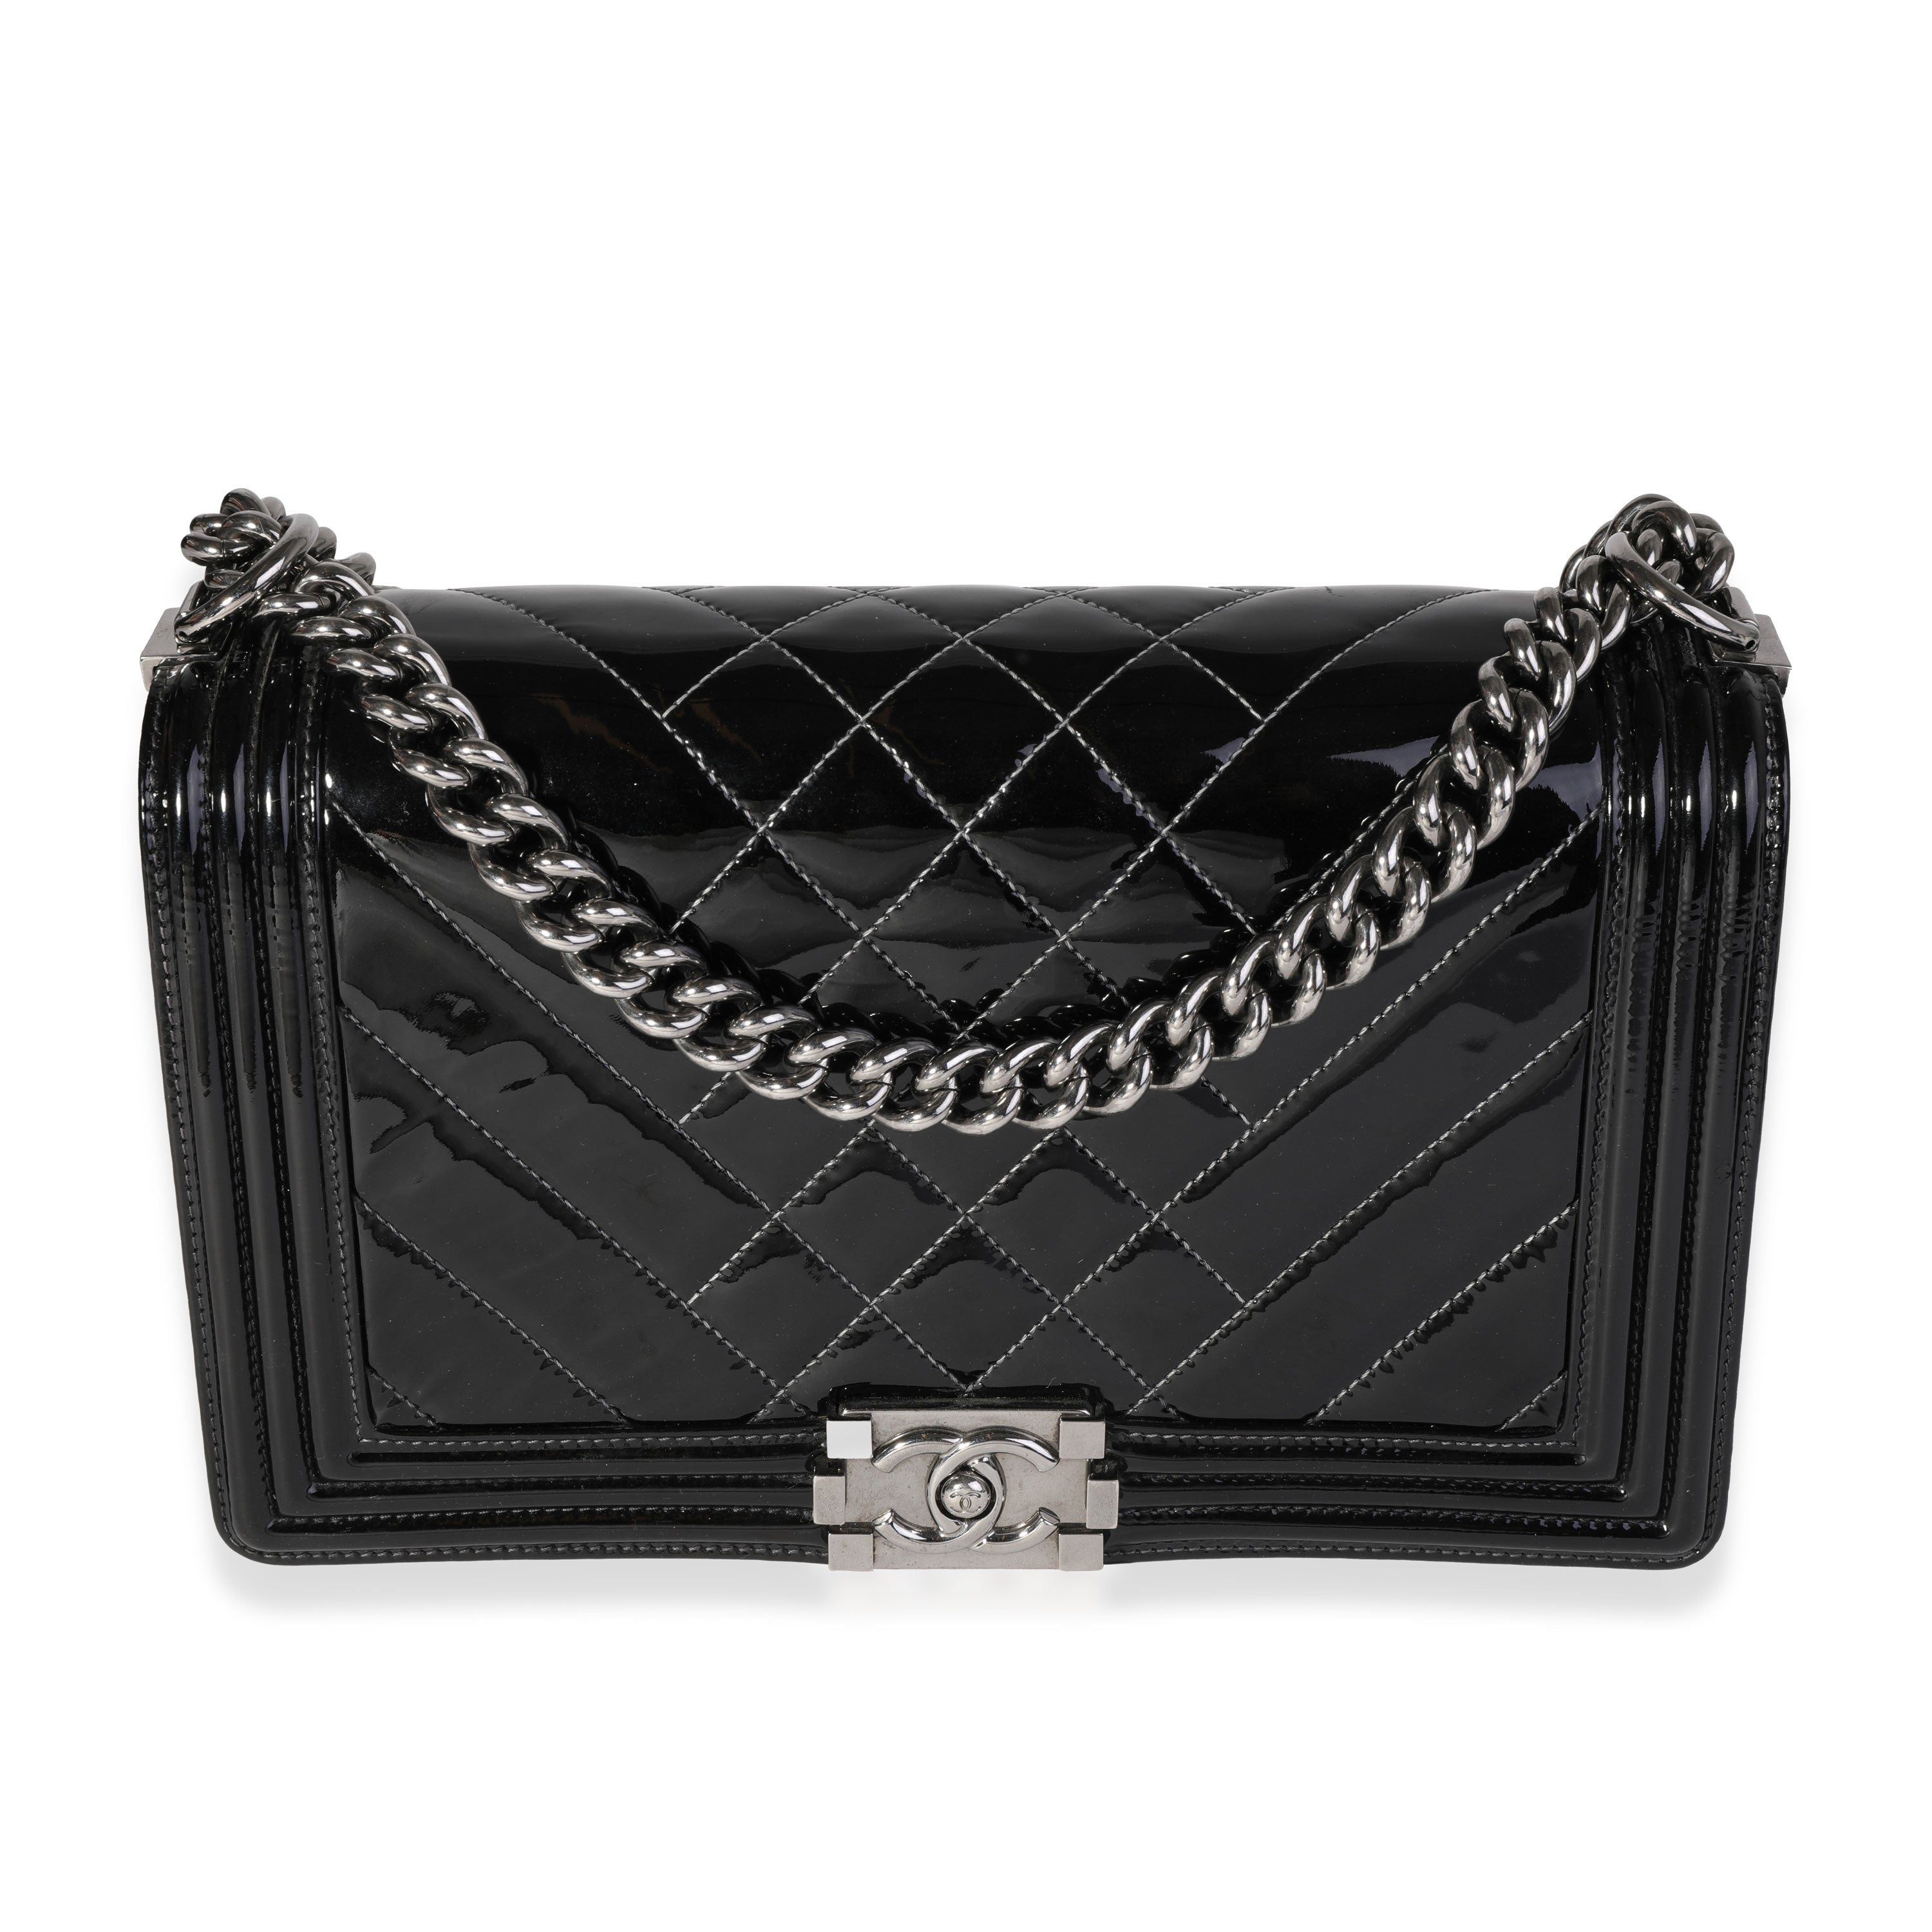 Chanel Black Quilted Patent Leather New Medium Boy Bag, myGemma, IT